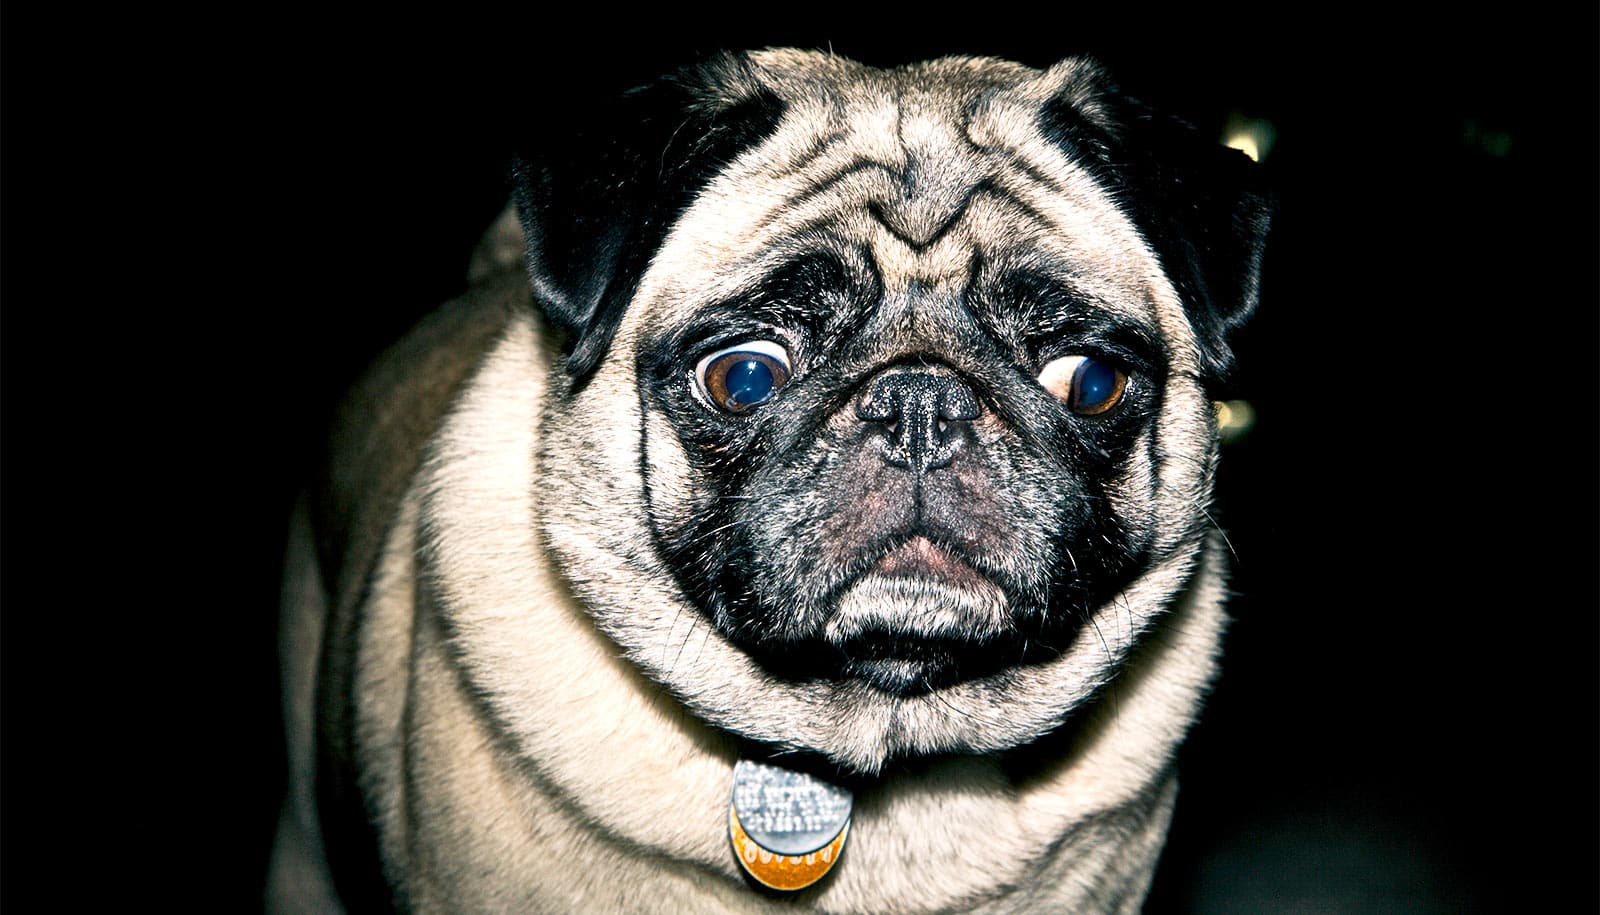 Animal abuse varies by people’s relationship to the pet. sad pug eyes. 